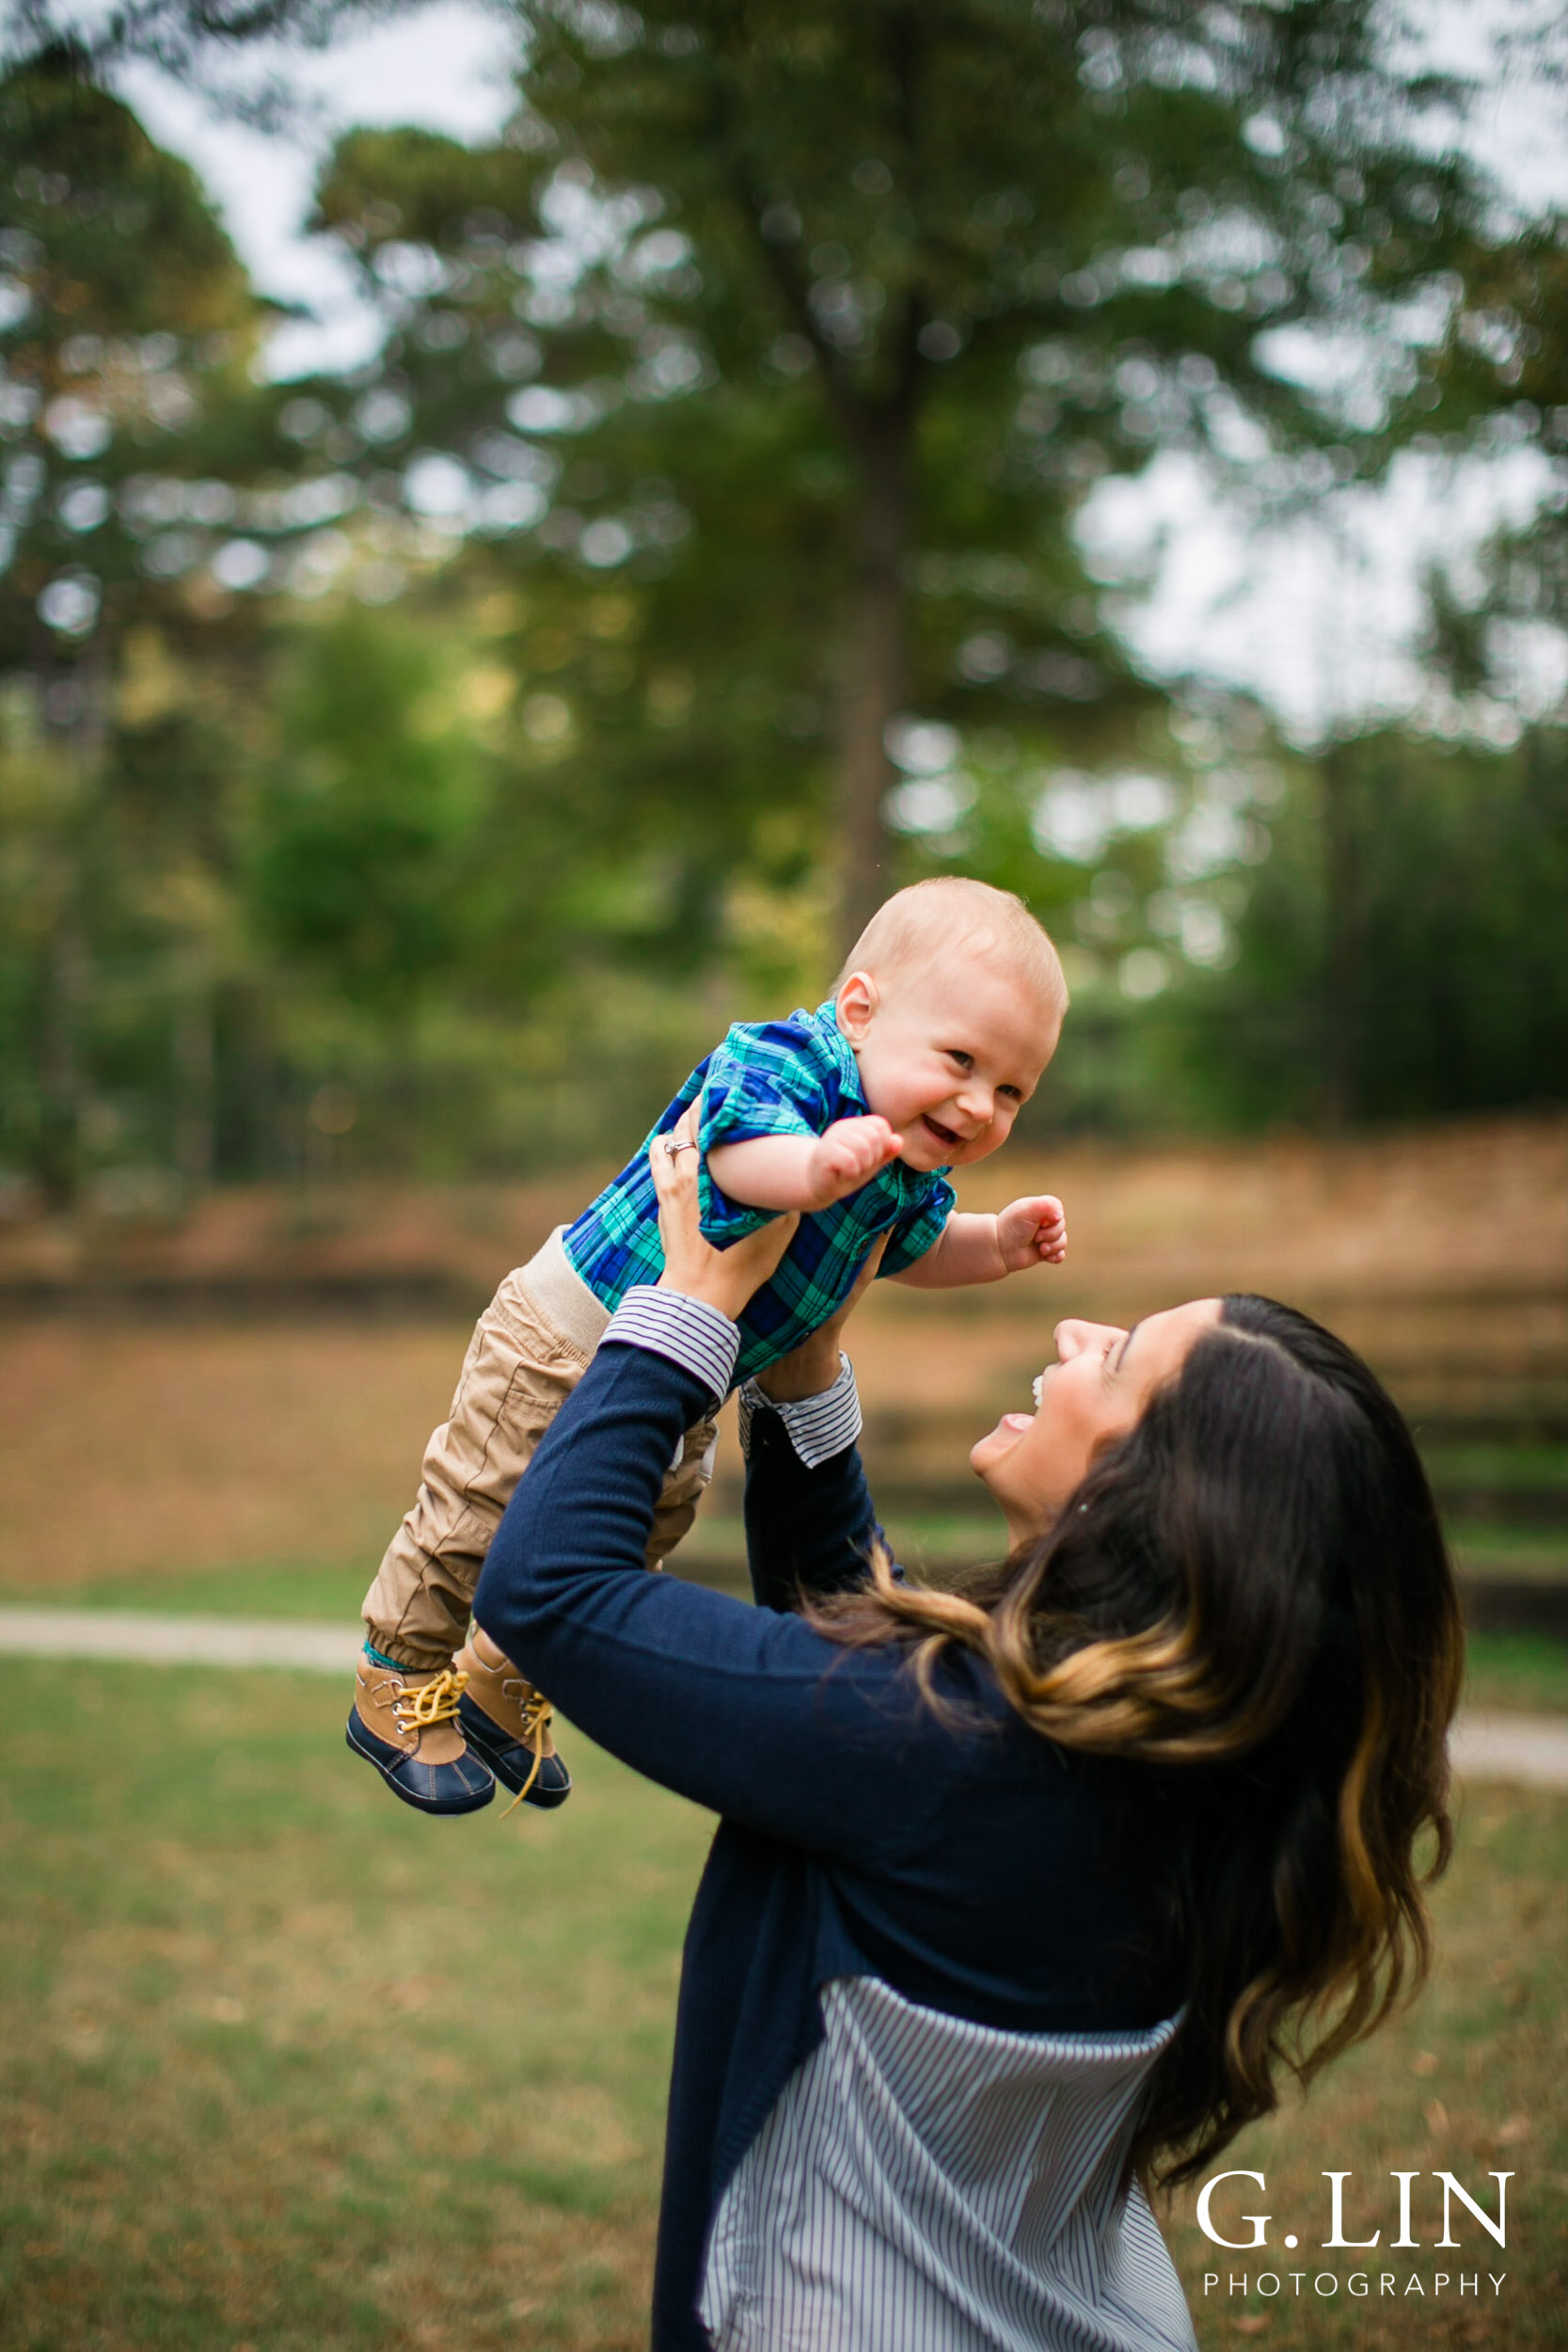 Raleigh Newborn Baby Photographer | G. Lin Photography | Mom playing with baby outside in park 